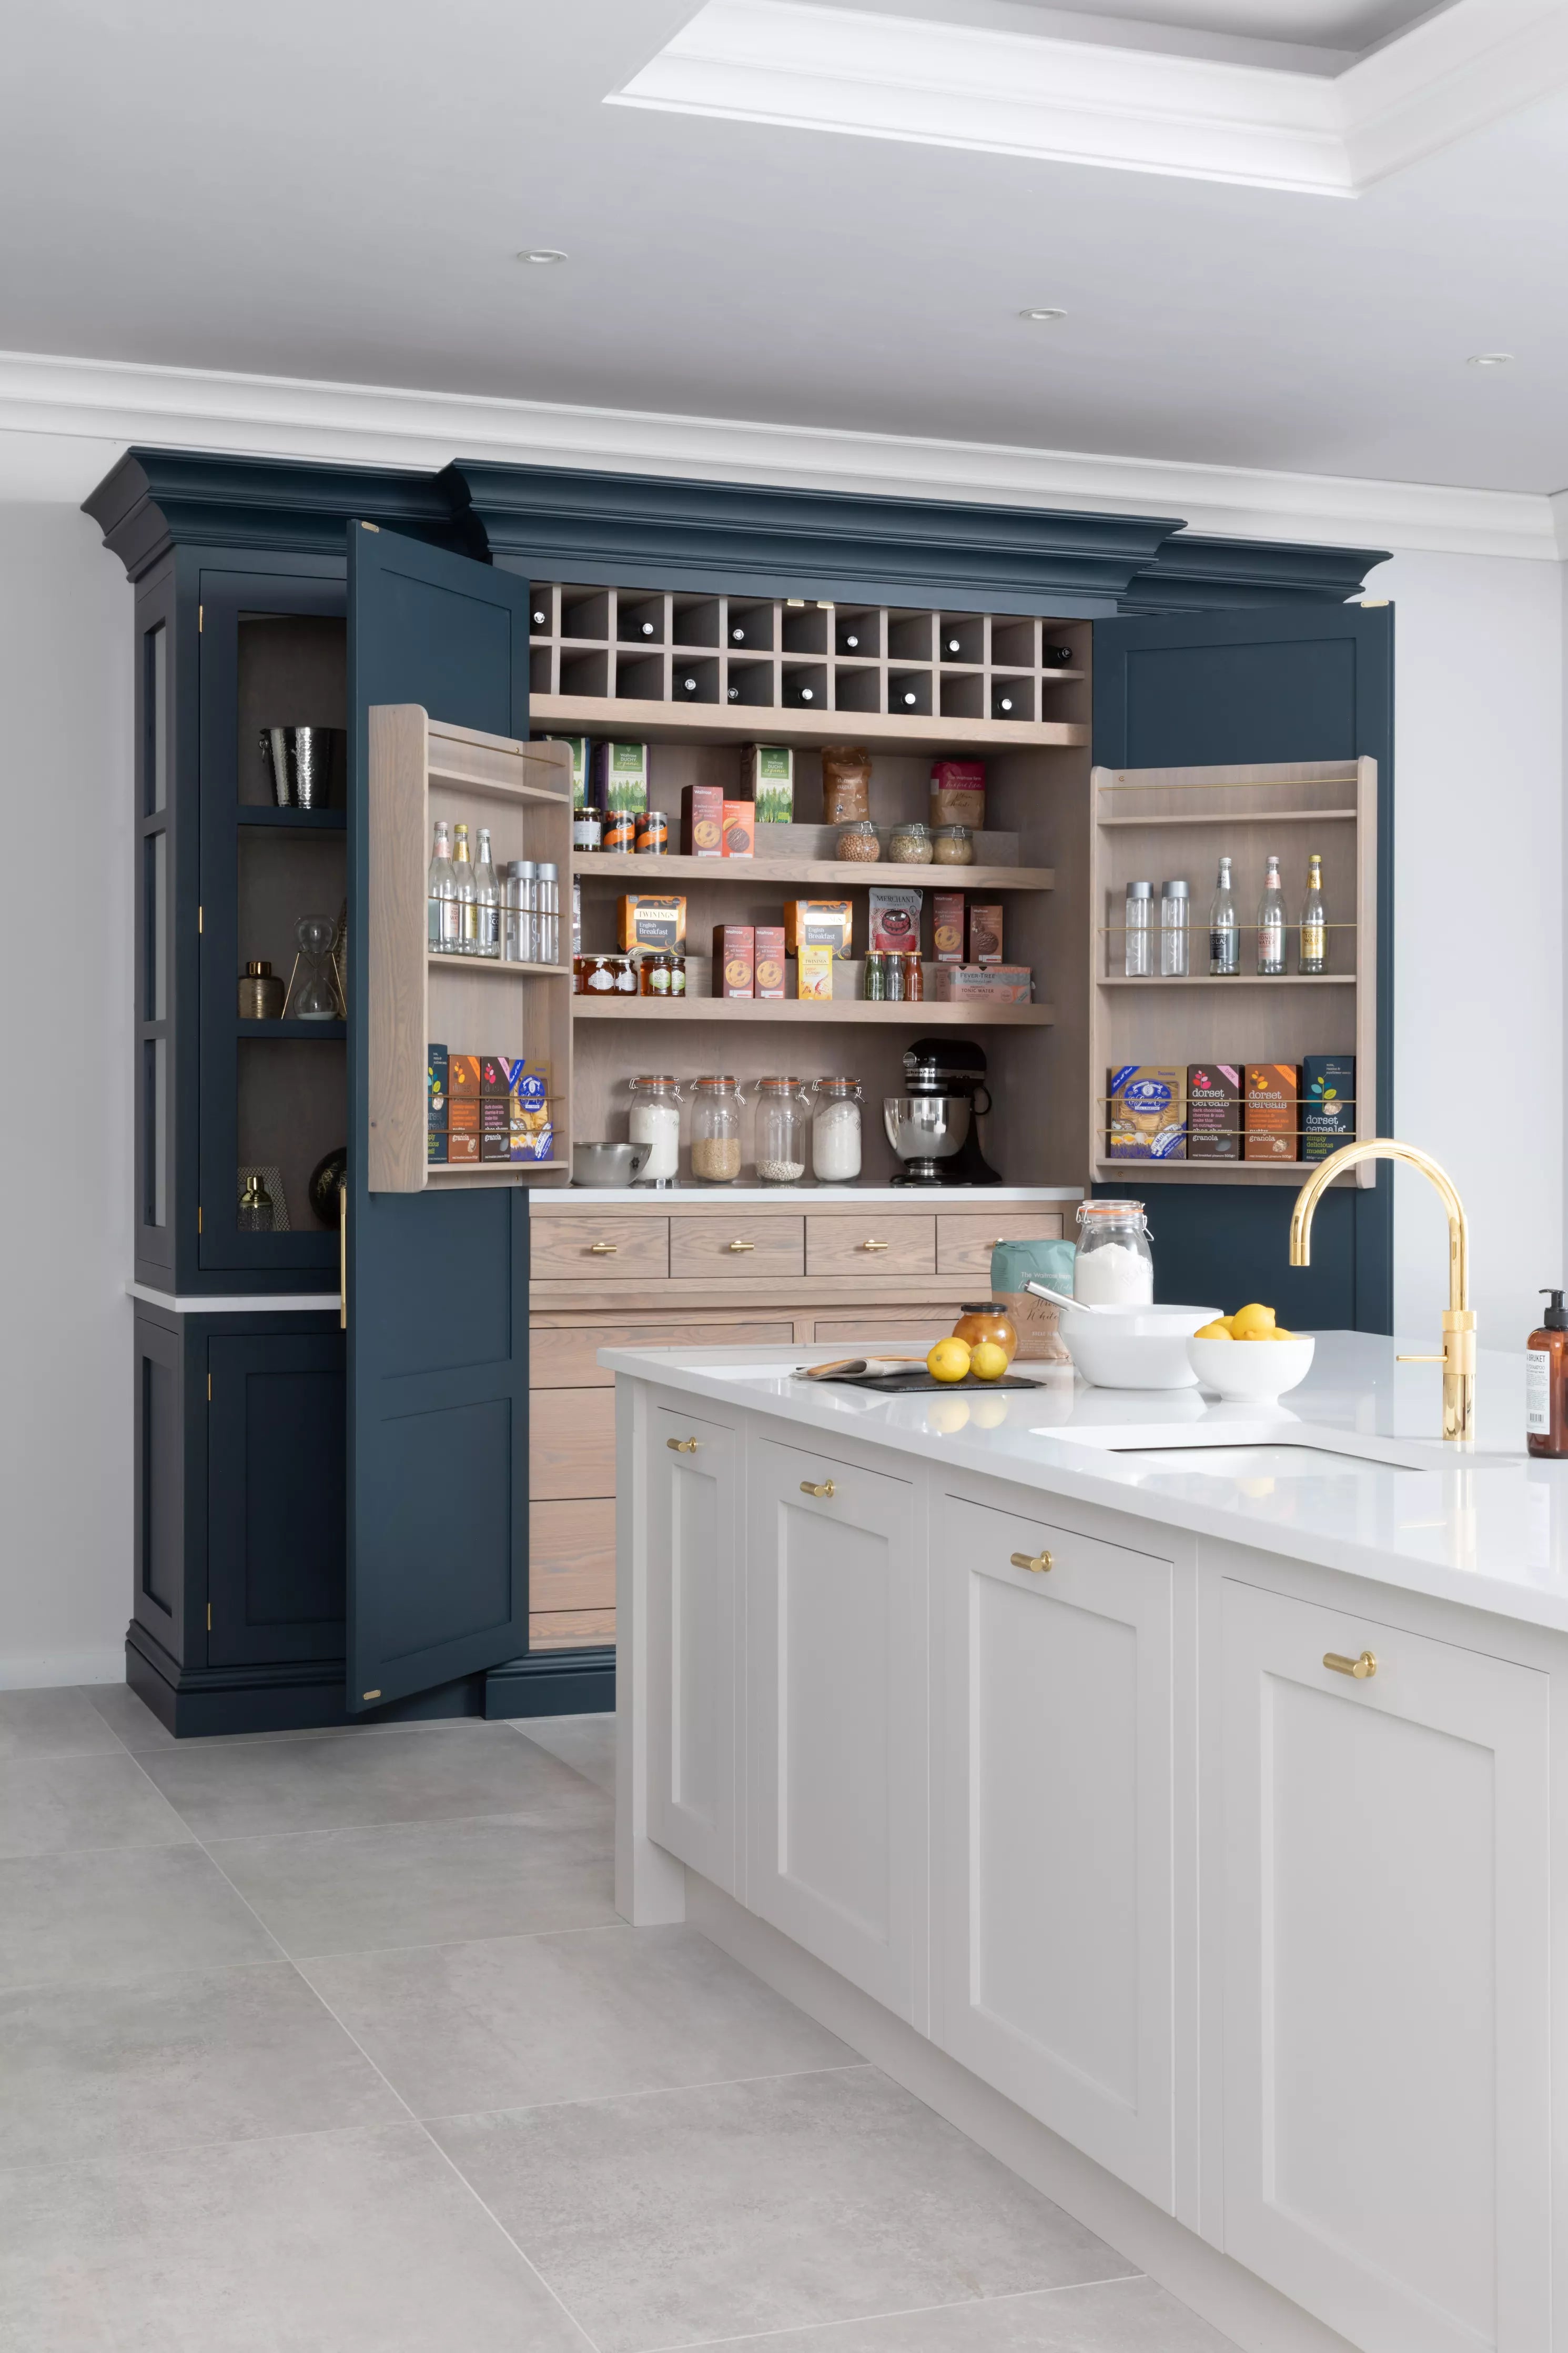 The Blue and Grey Kitchen